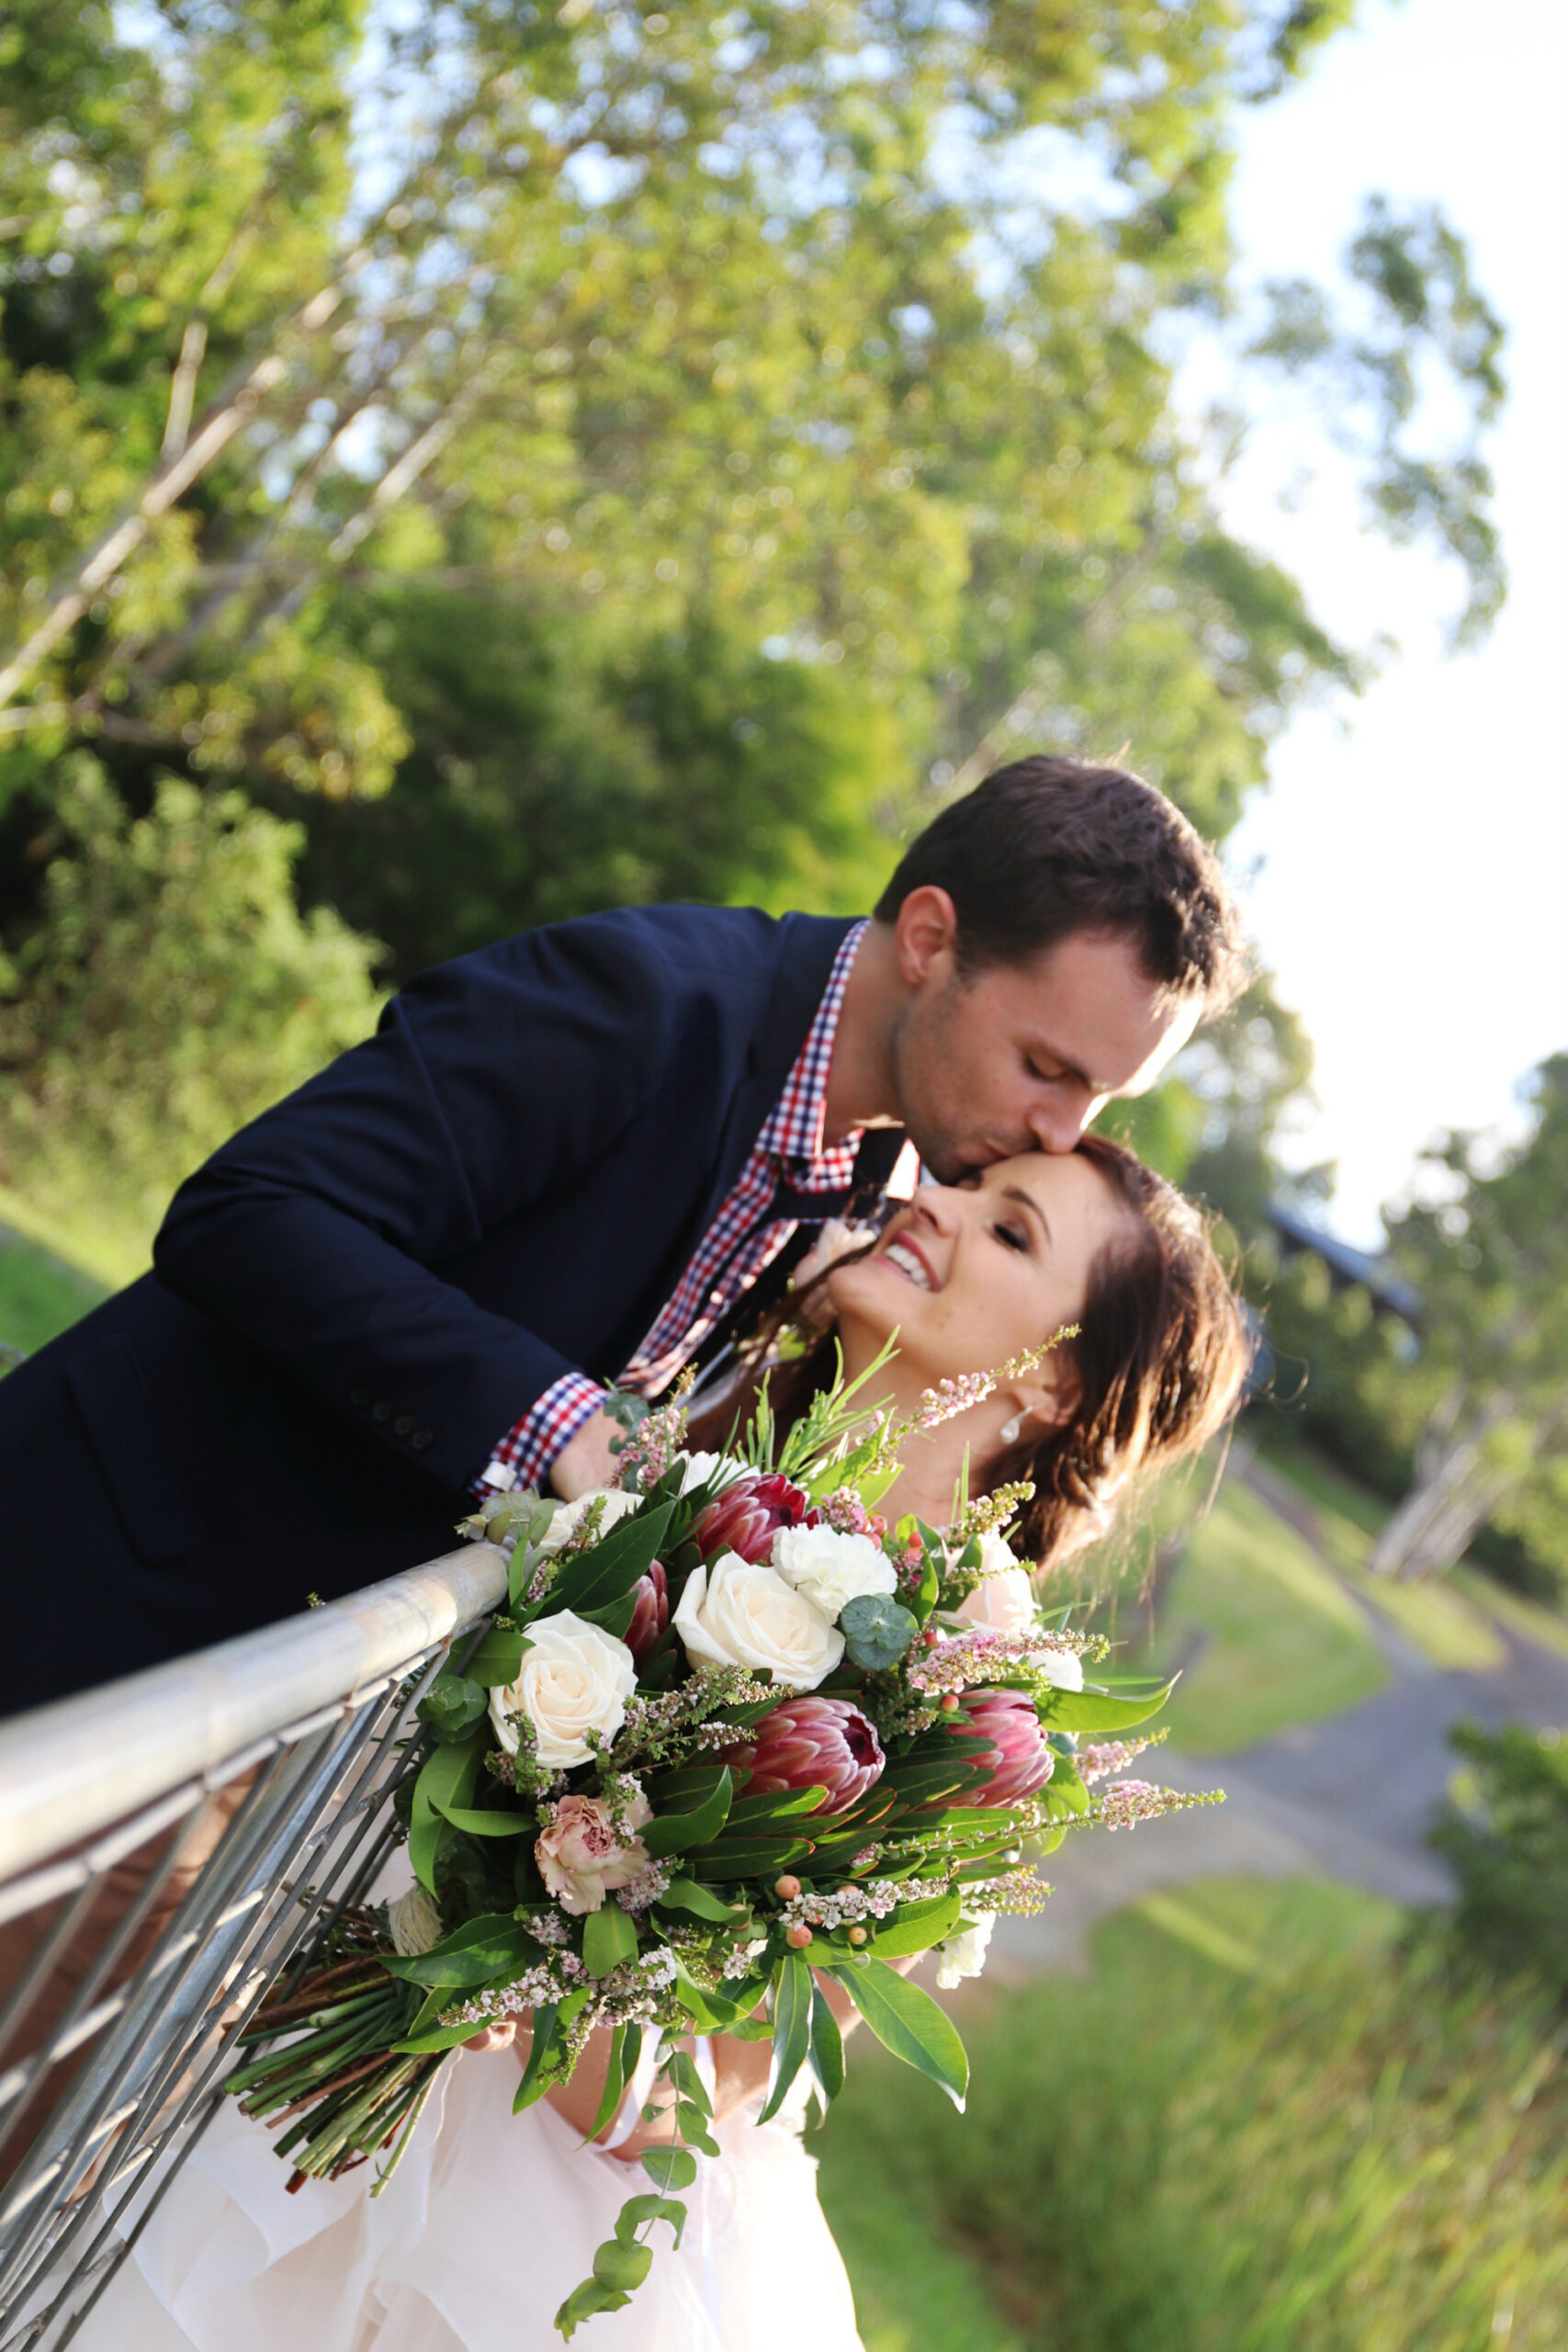 Kirsty_Cameron_Rustic-Country-Wedding_Christine-Anne-Photography_SBS_021